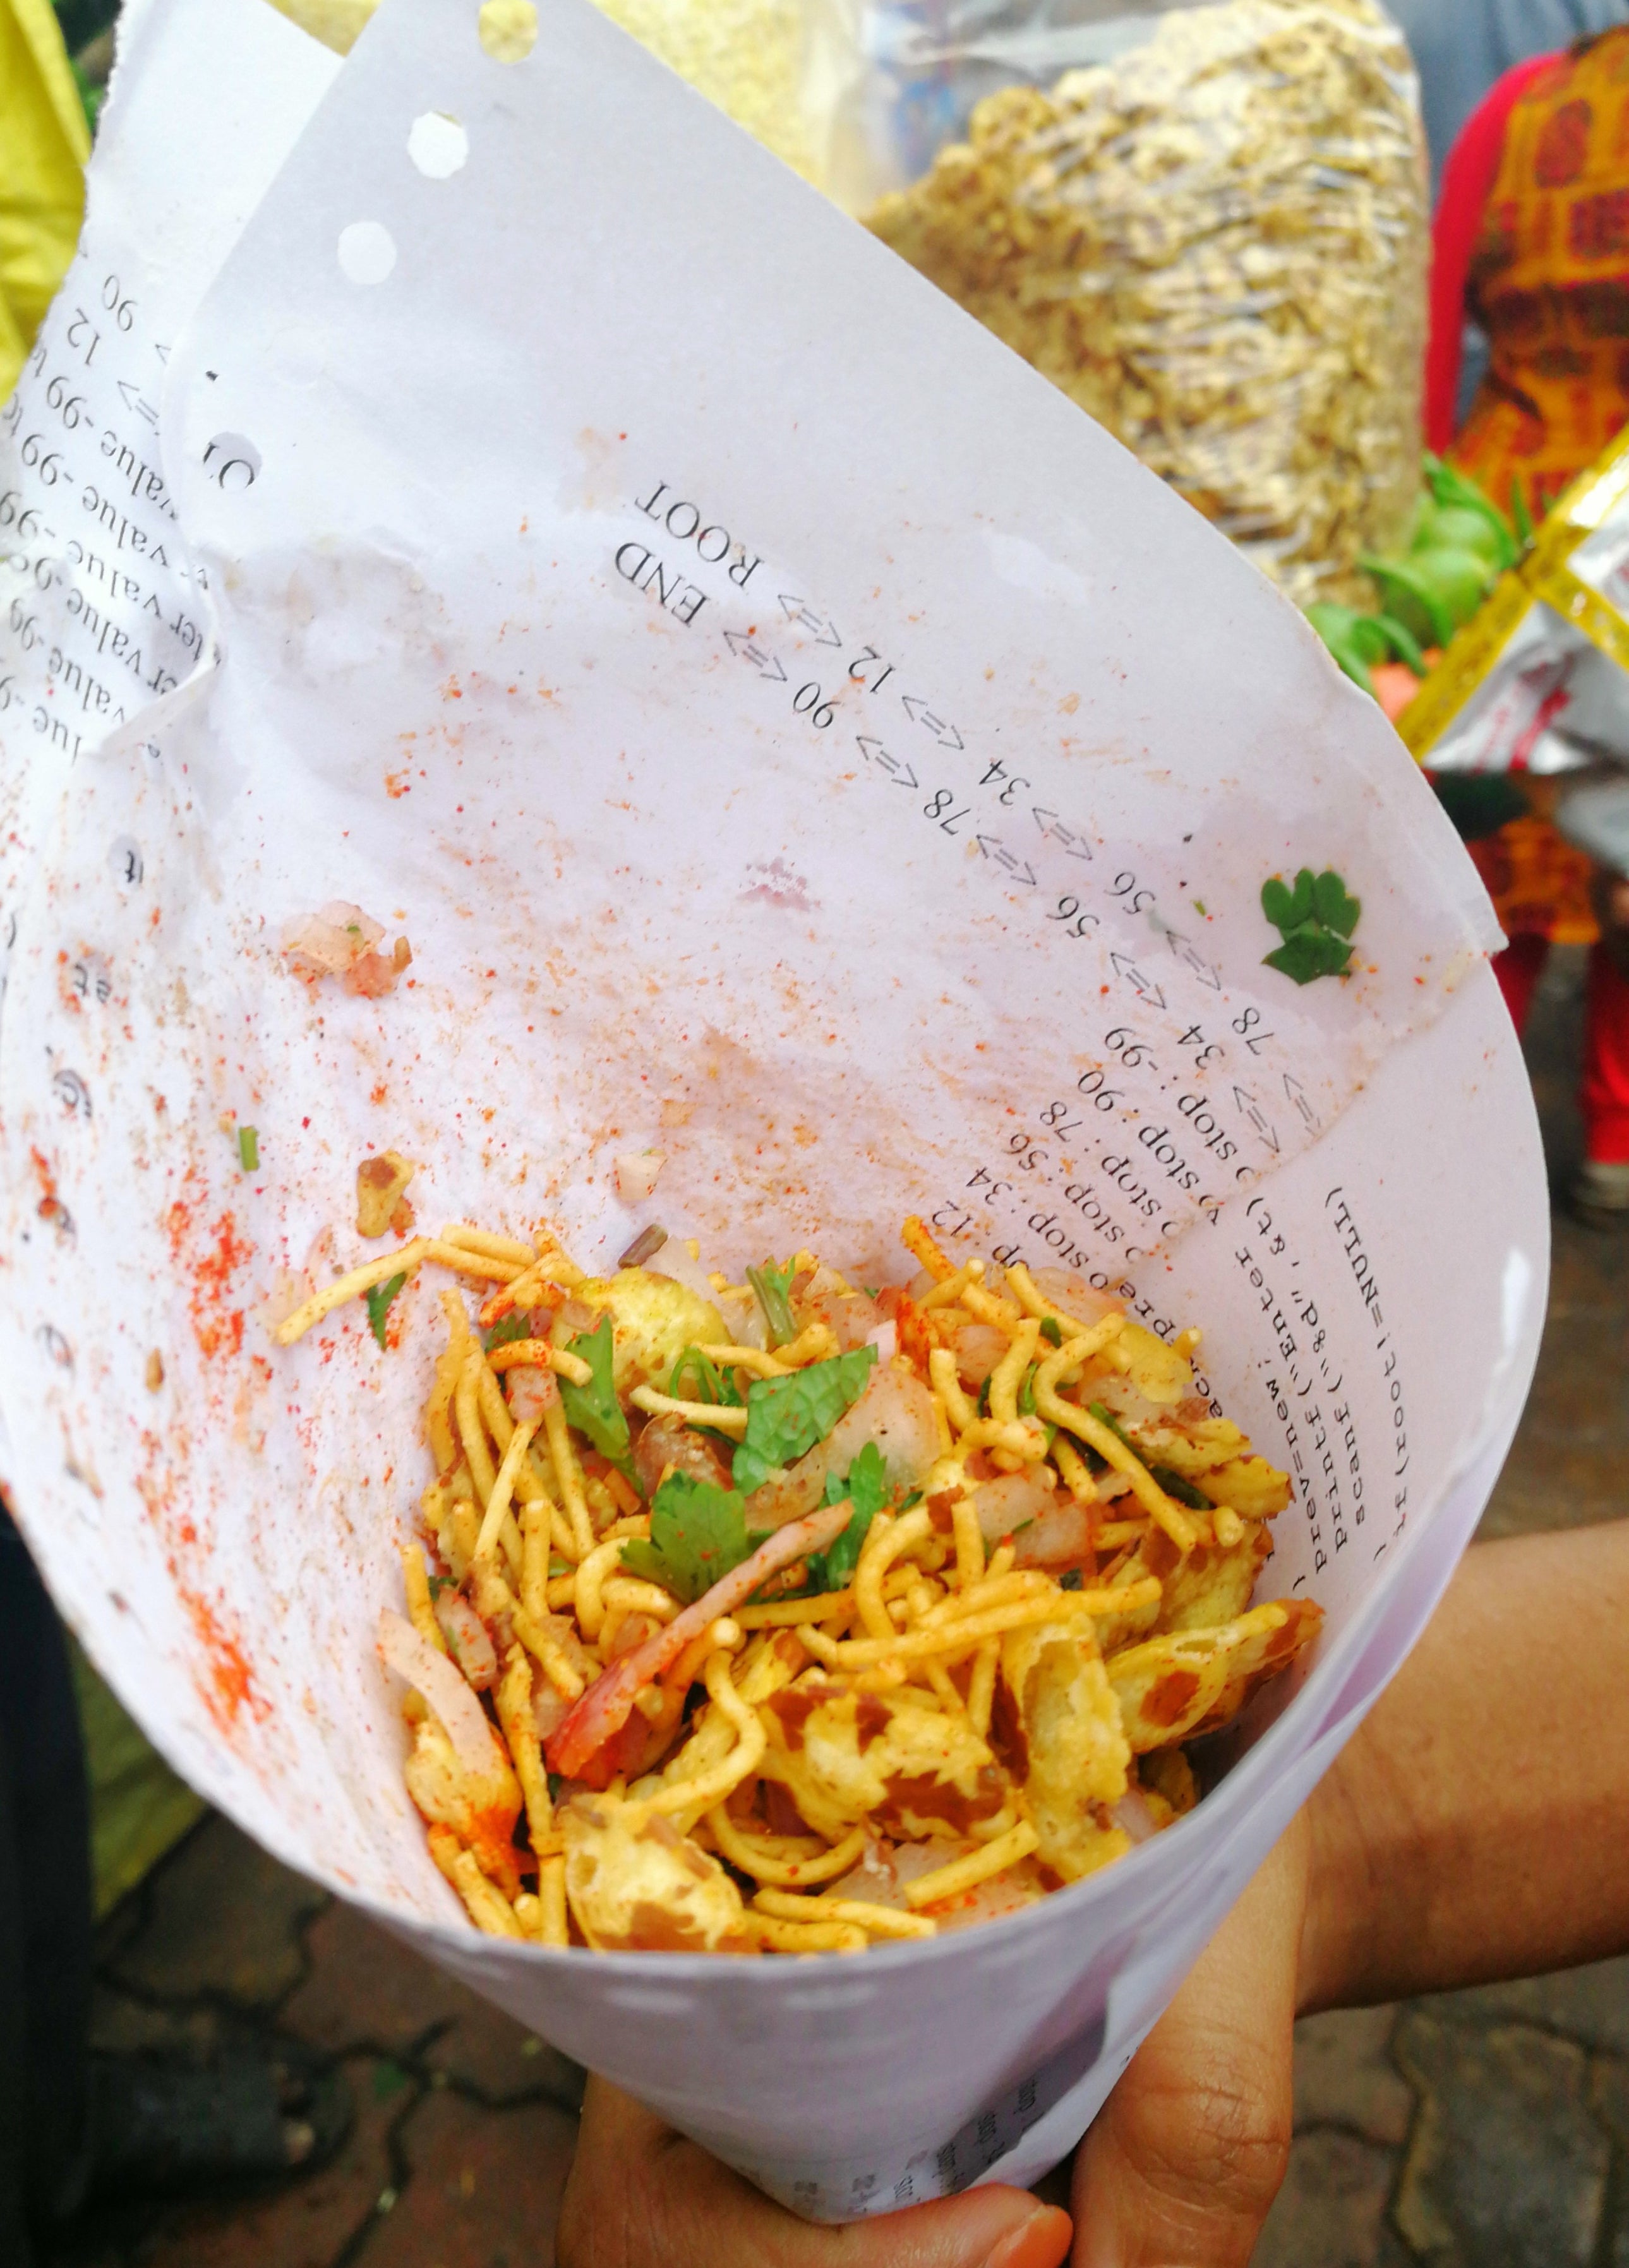 Some bhel served in a packet made out of paper